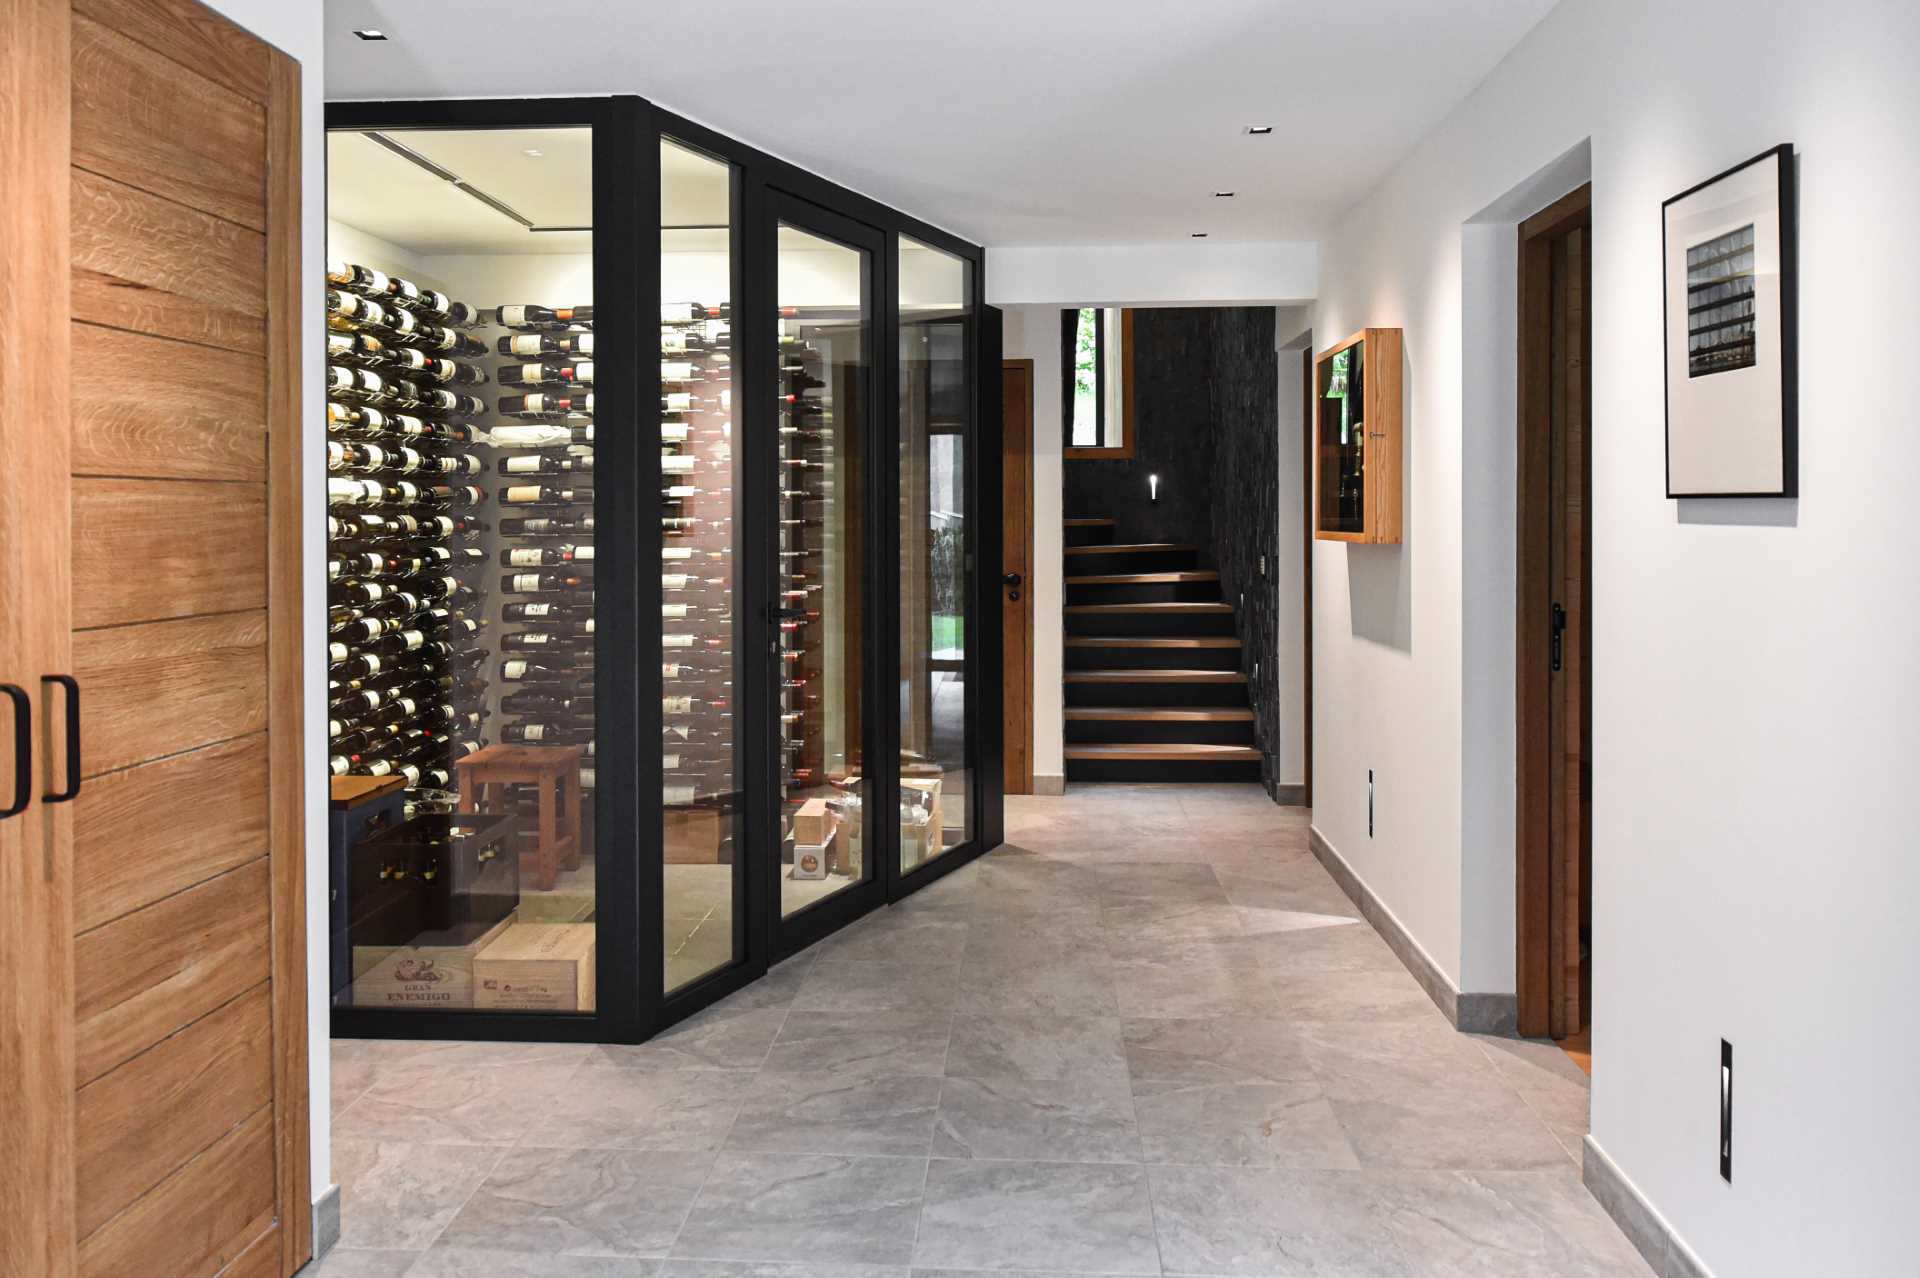 A modern home with a glass enclosed wine cellar.